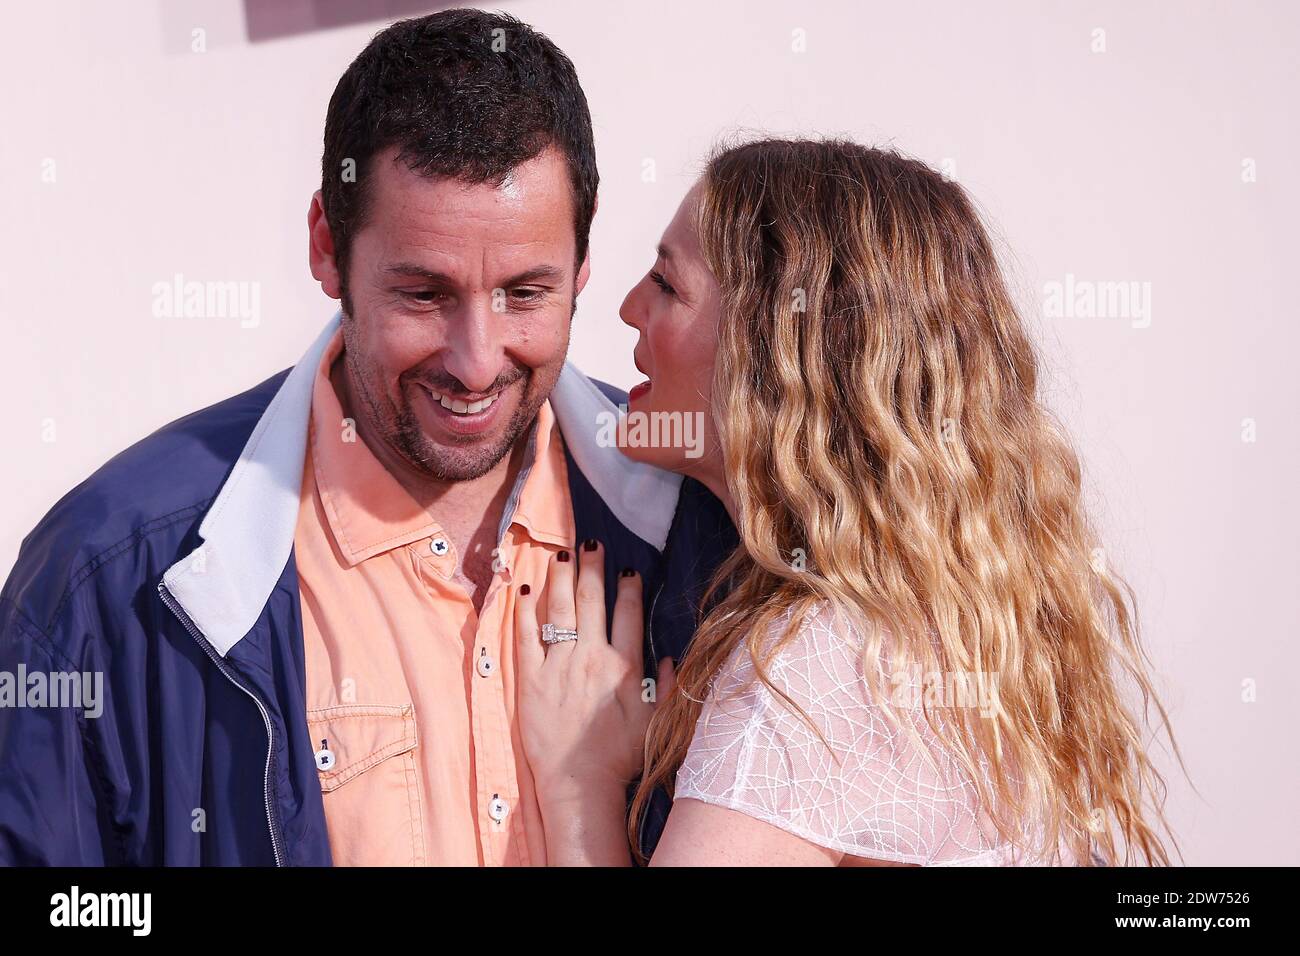 Adam Sandler and Drew Barrymore attend the Blended premiere at TCL Chinese Theatre, in Hollywood, Los Angeles, CA, USA on May 21, 2014. Photo by Julian Da Costa/ABACAPRESS.COM Stock Photo